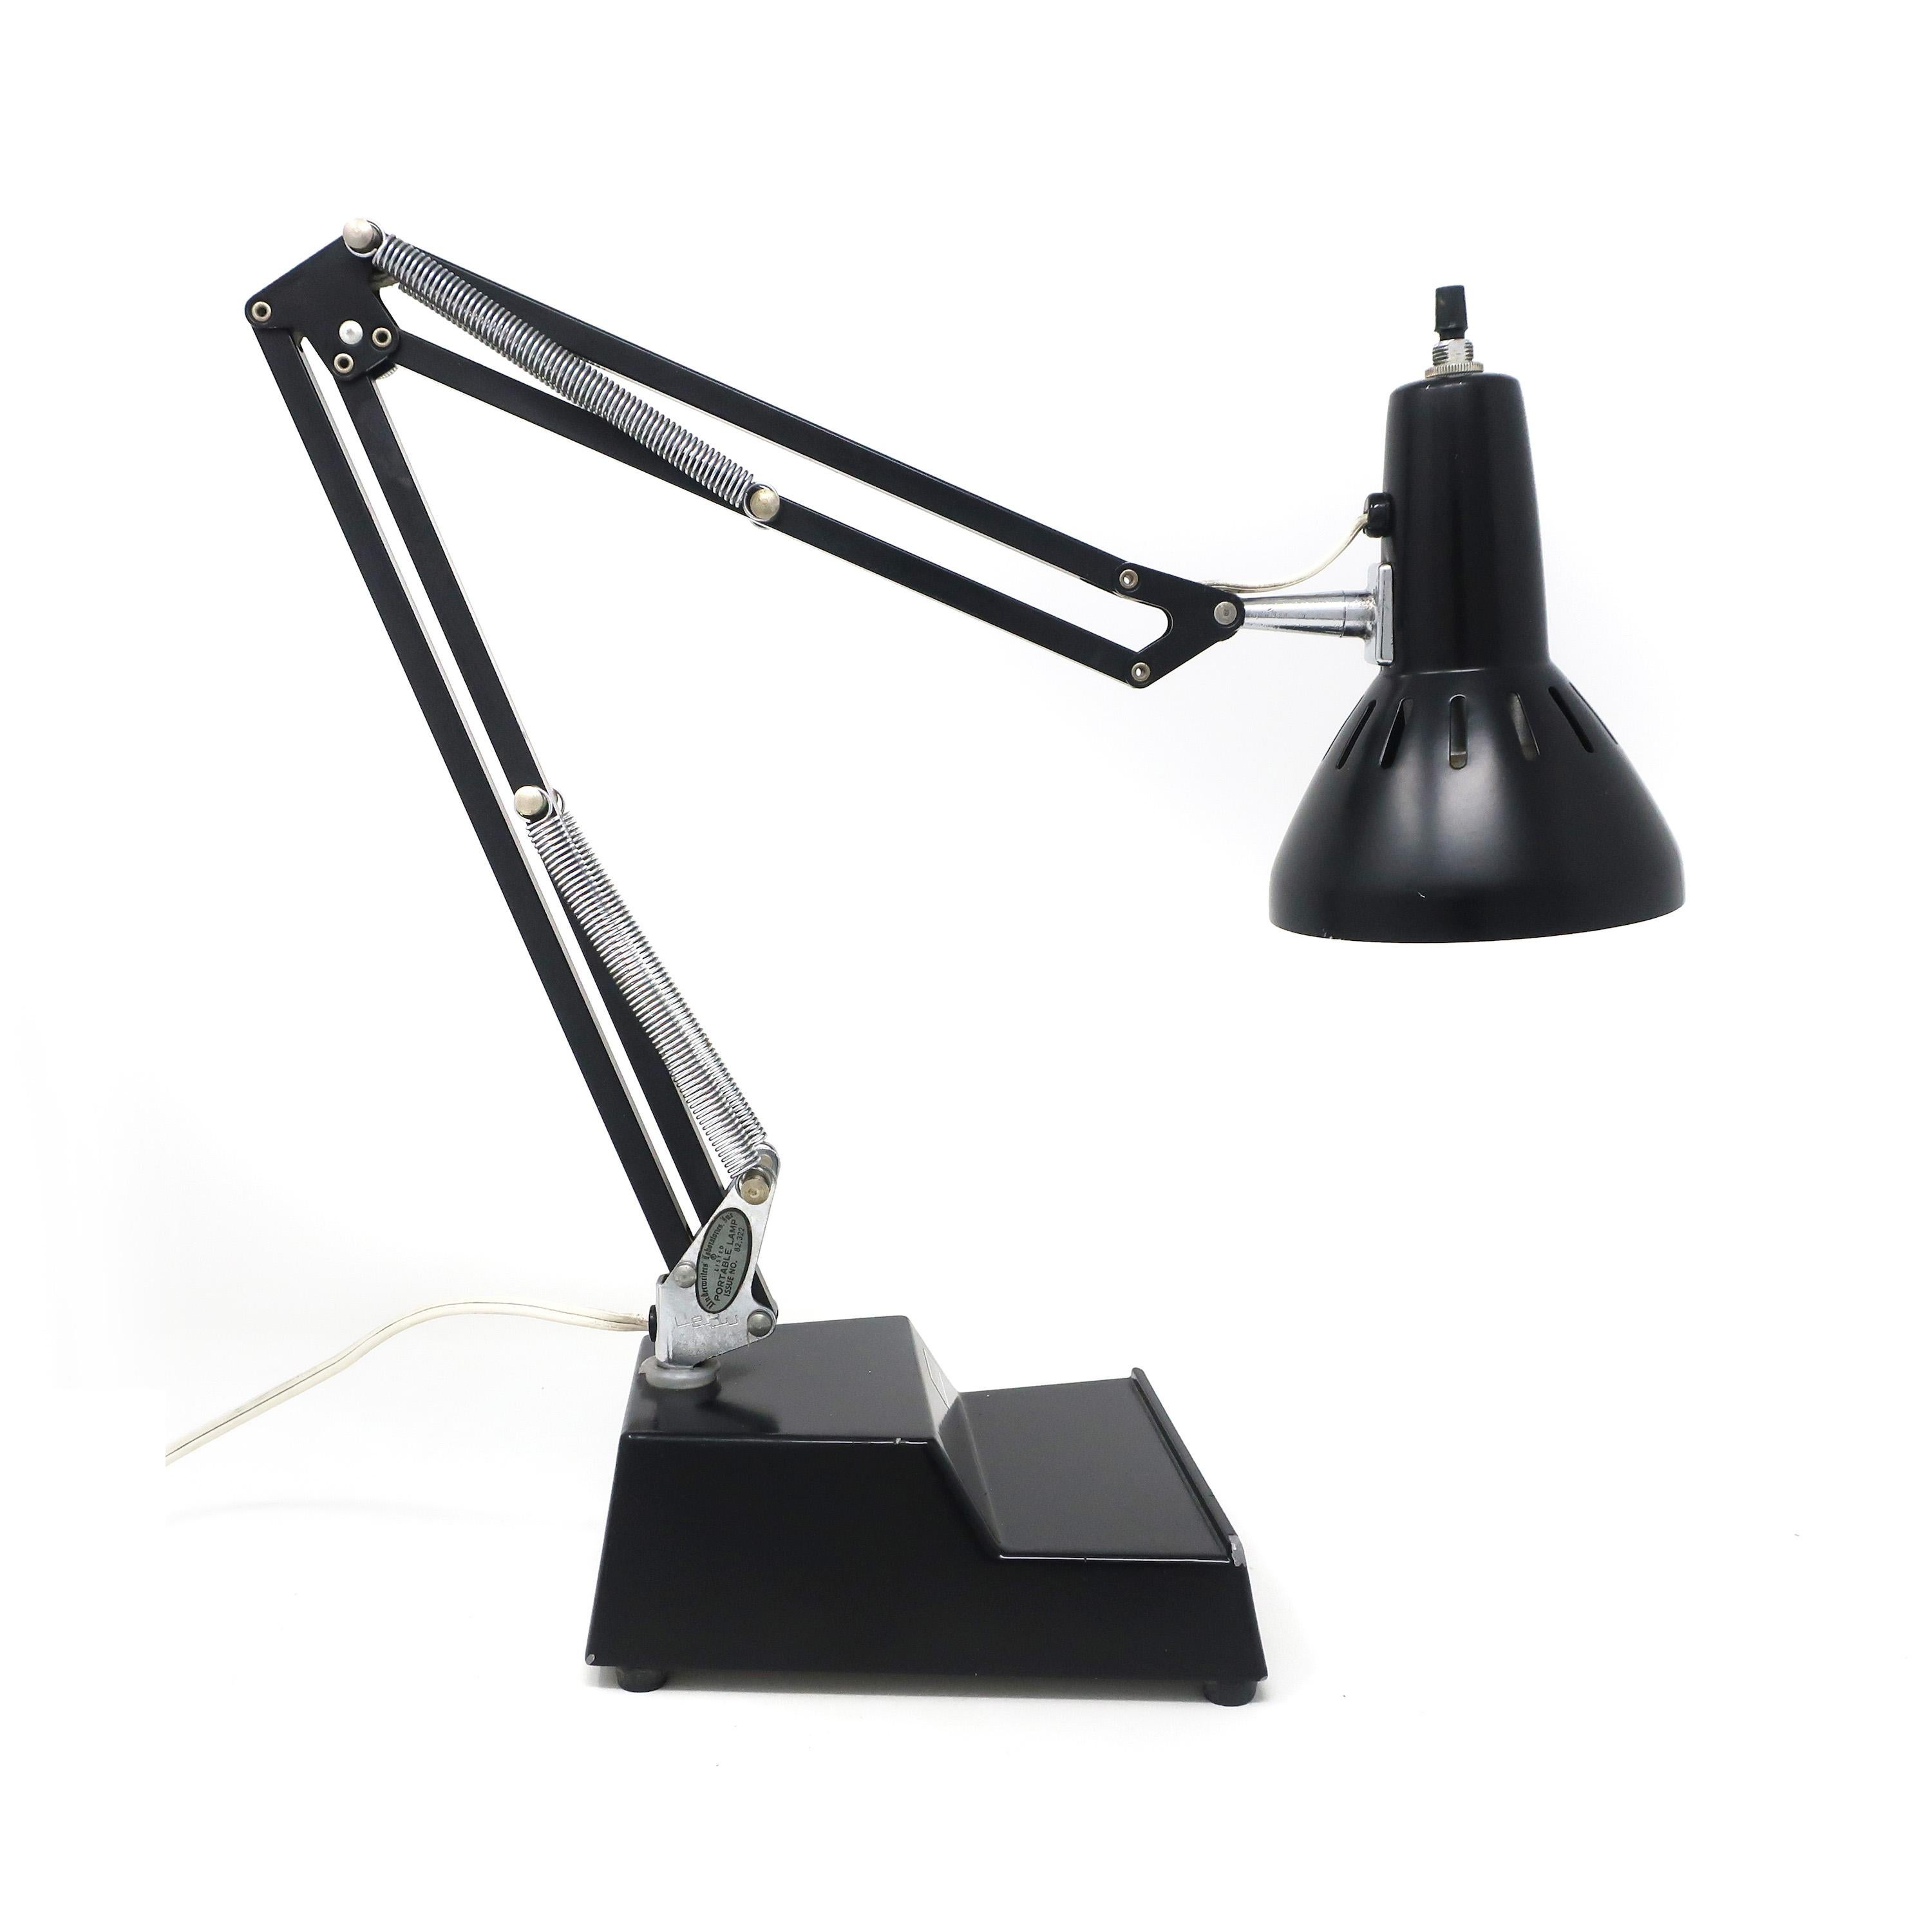 A vintage ledu adjustable desk lamp with black base, stem, and shade and chrome accents. A similar style to the Luxo L-1 lamp but with a weighted metal base. A classic design that still looks modern today! 

In very good vintage condition with